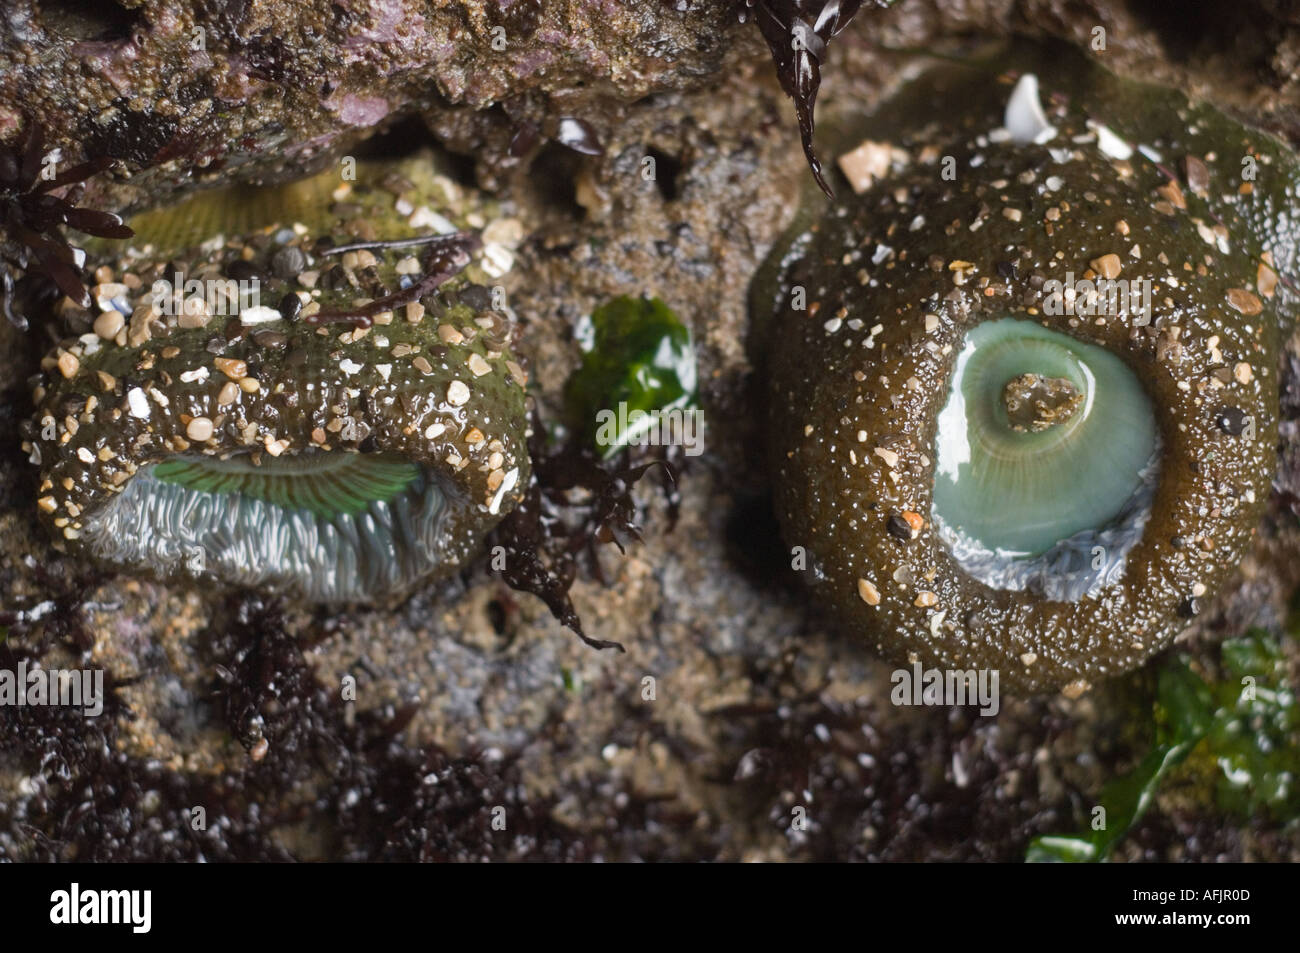 two sea anemones hanging from the roof of a tidal cave encrusted with rocks showing their center and tentacles colored green Stock Photo